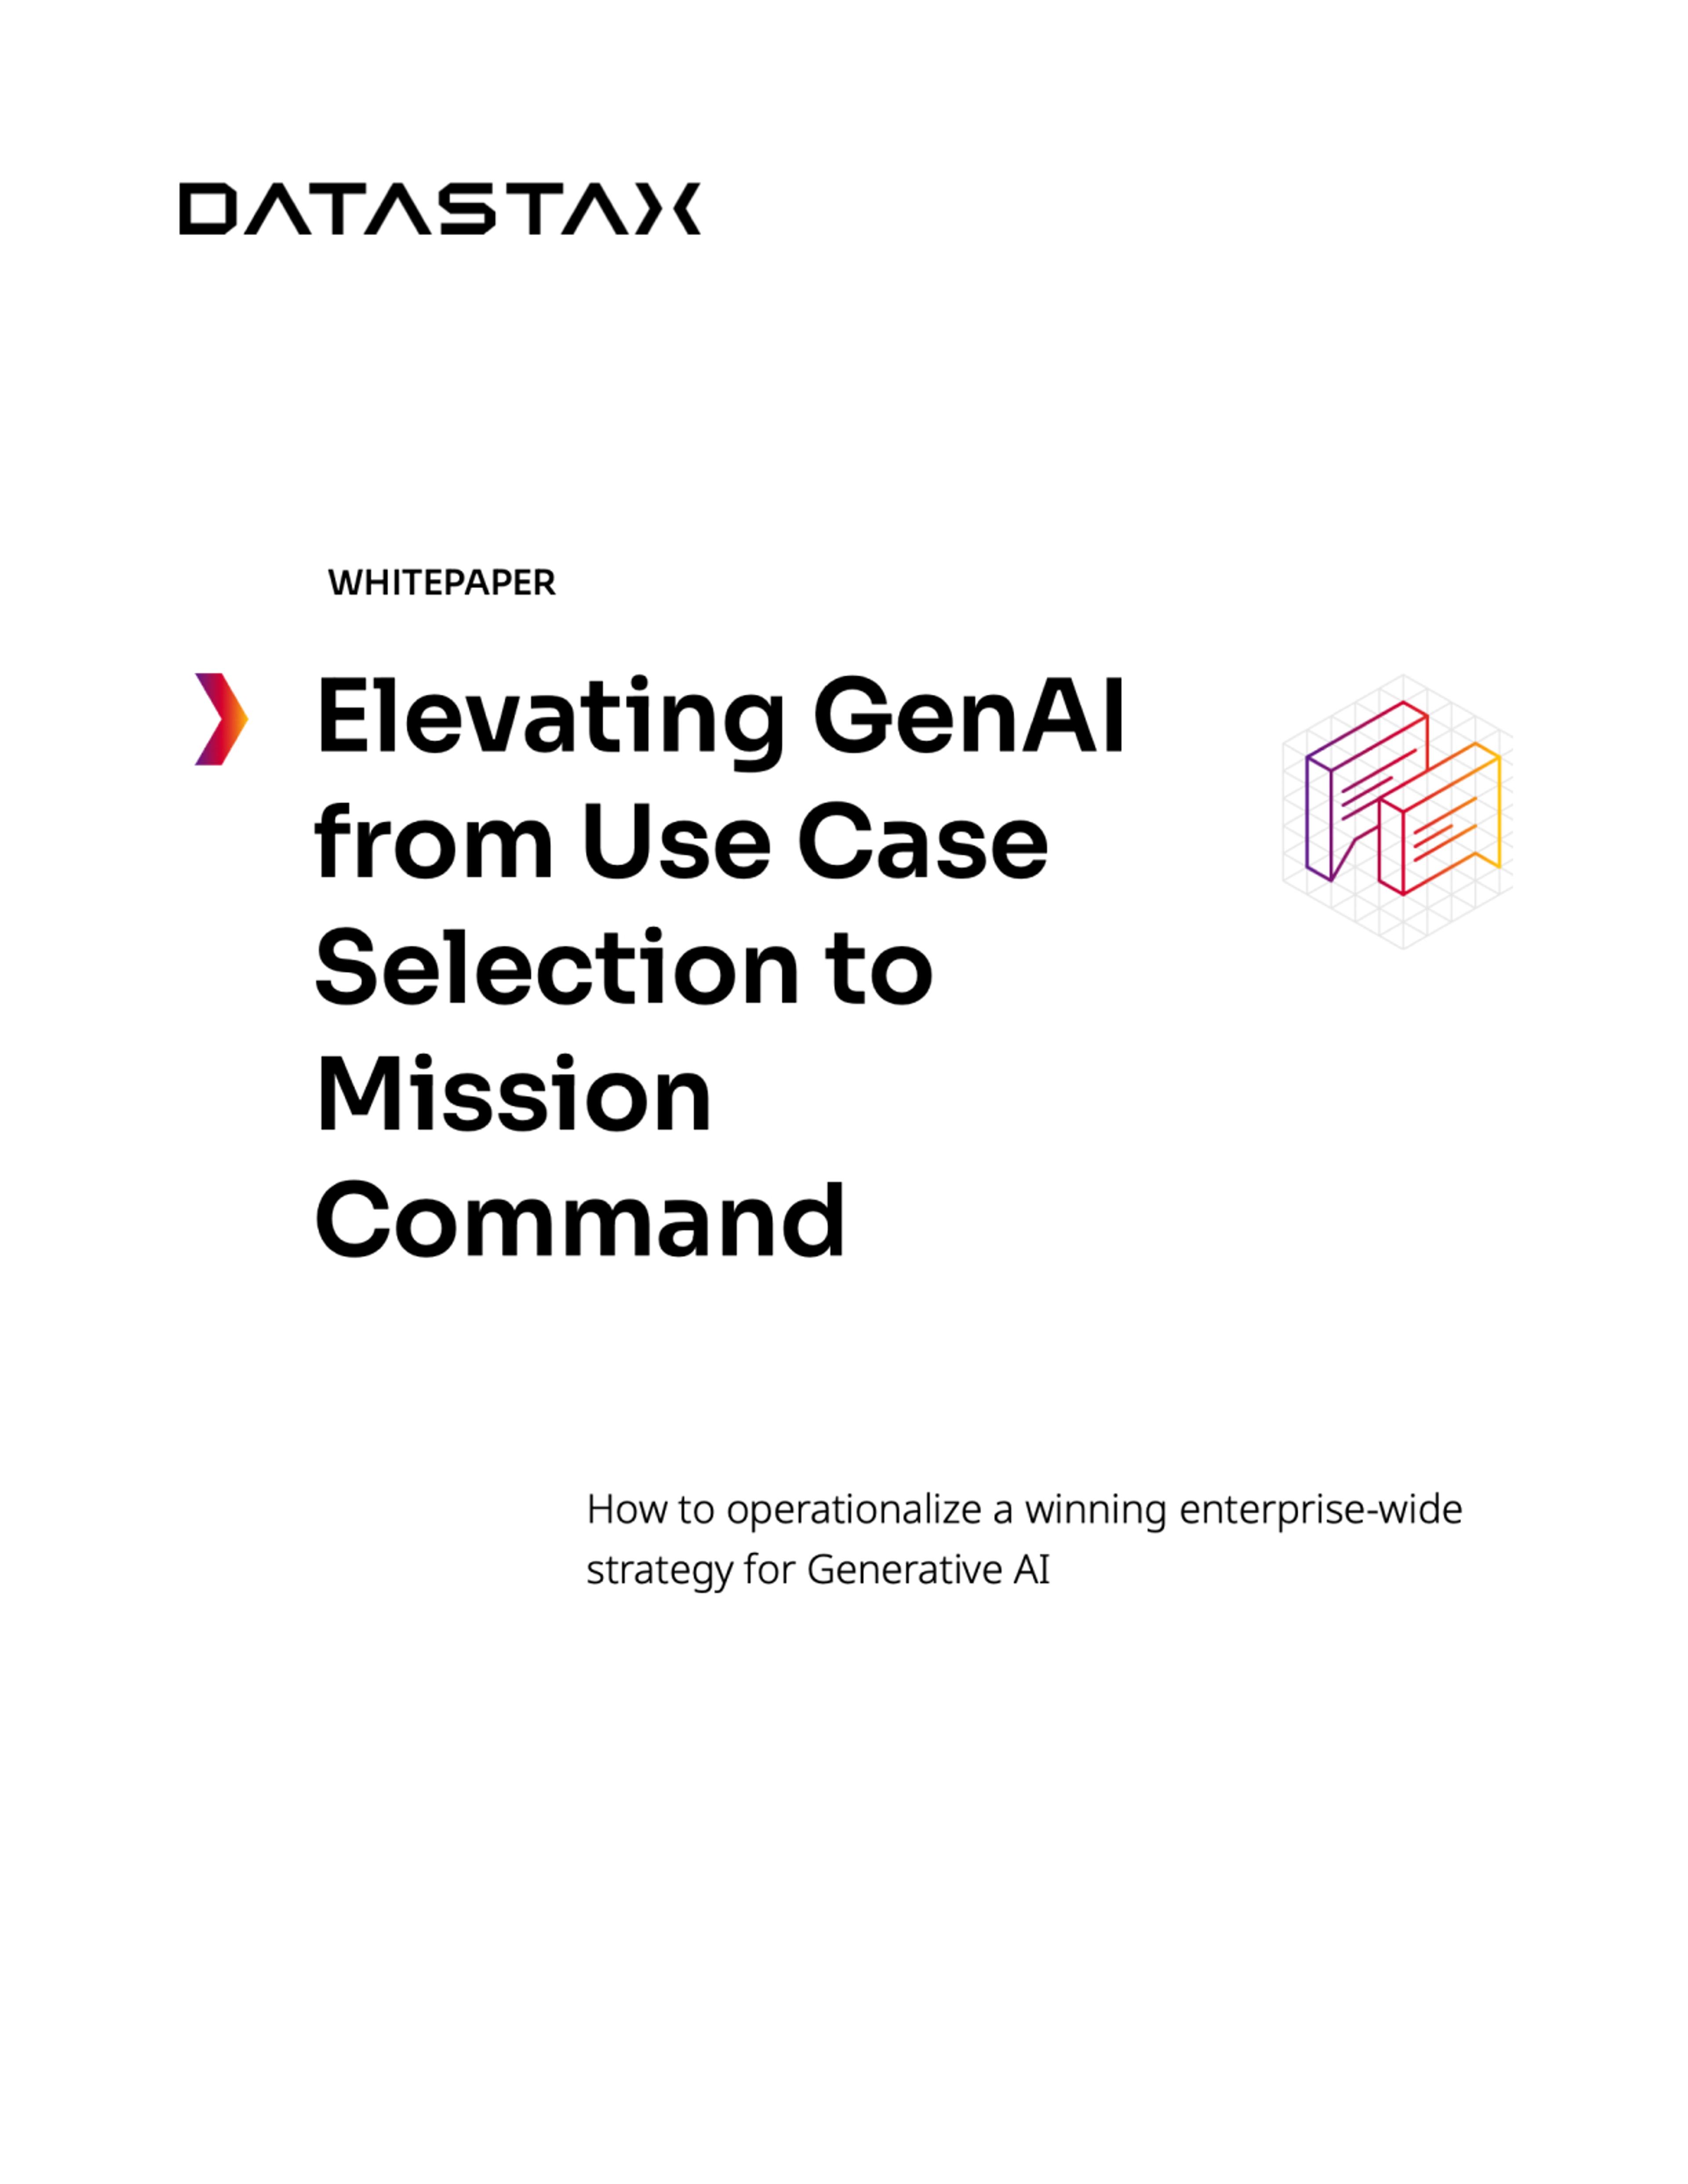 Elevating Generative AI from Use Case Selection to Mission Command